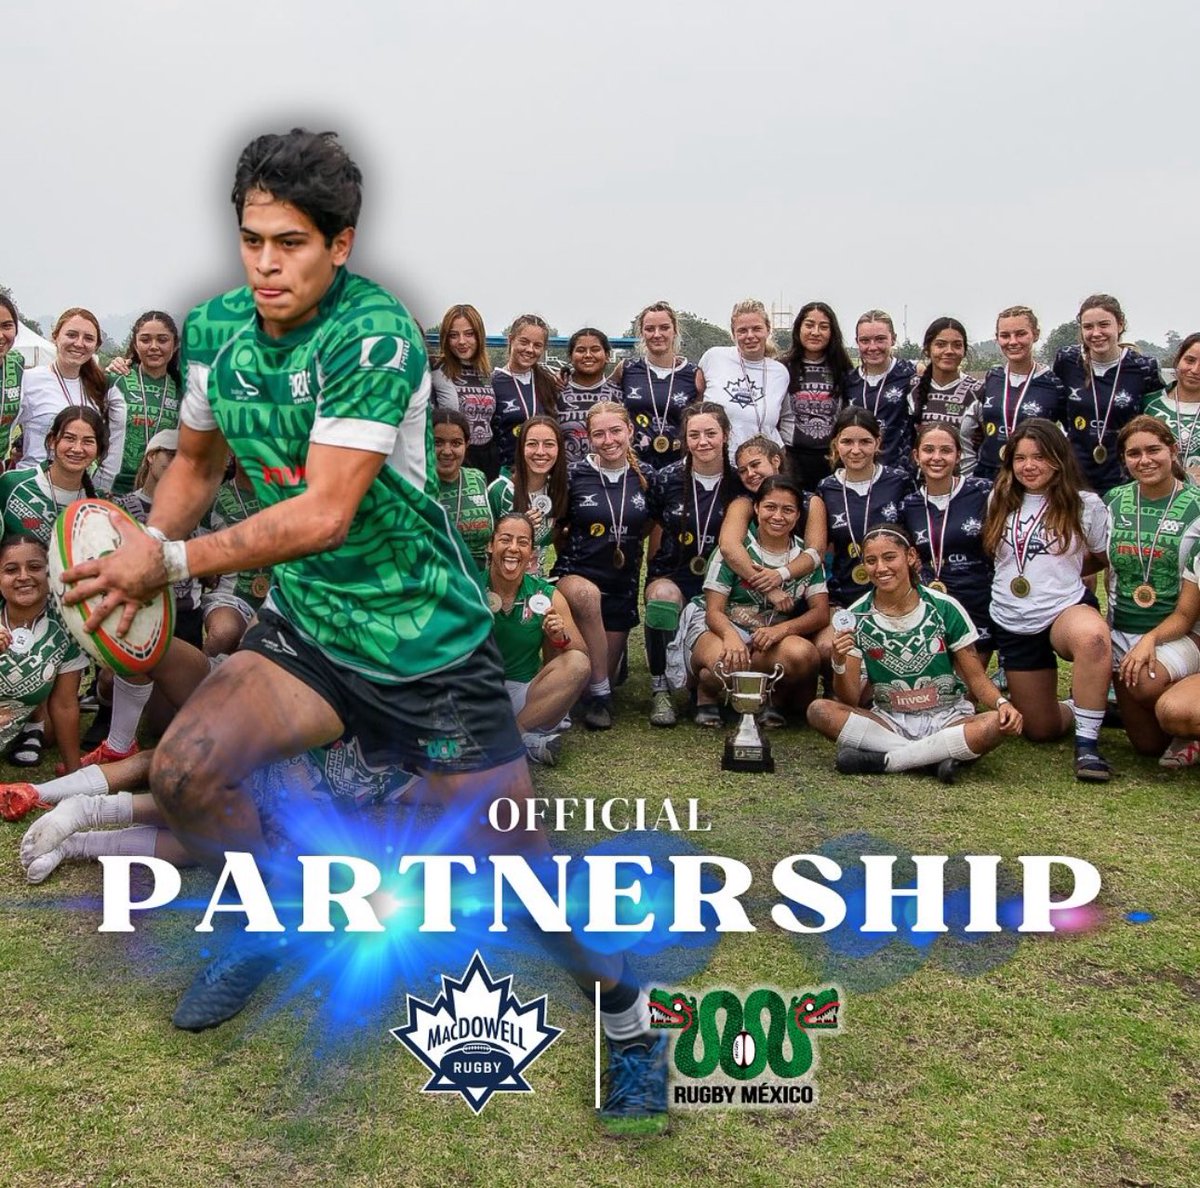 MACDOWELLRUGBY is proud to officially partner with Rugby Mexico to collaborate on initiatives aimed at promoting, growing, and developing rugby in Mexico 🏆🇲🇽 “Joining forces between Rugby Mexico and MACDOWELLRUGBY symbolizes a profound commitment to develop Rugby in Mexico.…